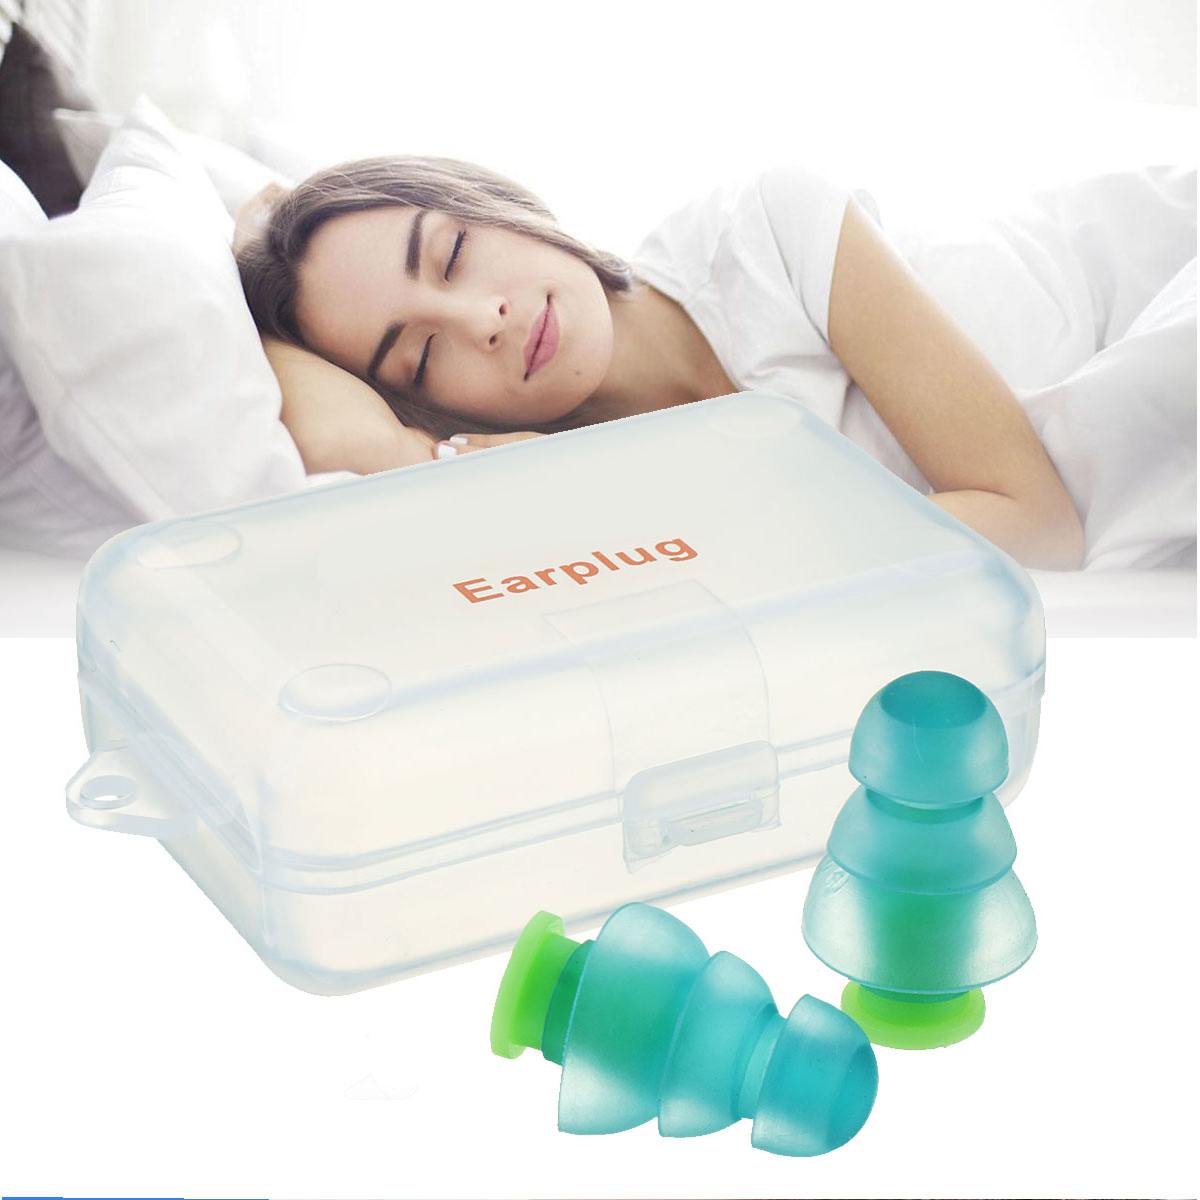 1 Pair Silicone Sleeping Ear Plugs Noise Cancelling Hearing Protection Motorcycles Reusable Ear Plugs for Ear Protection